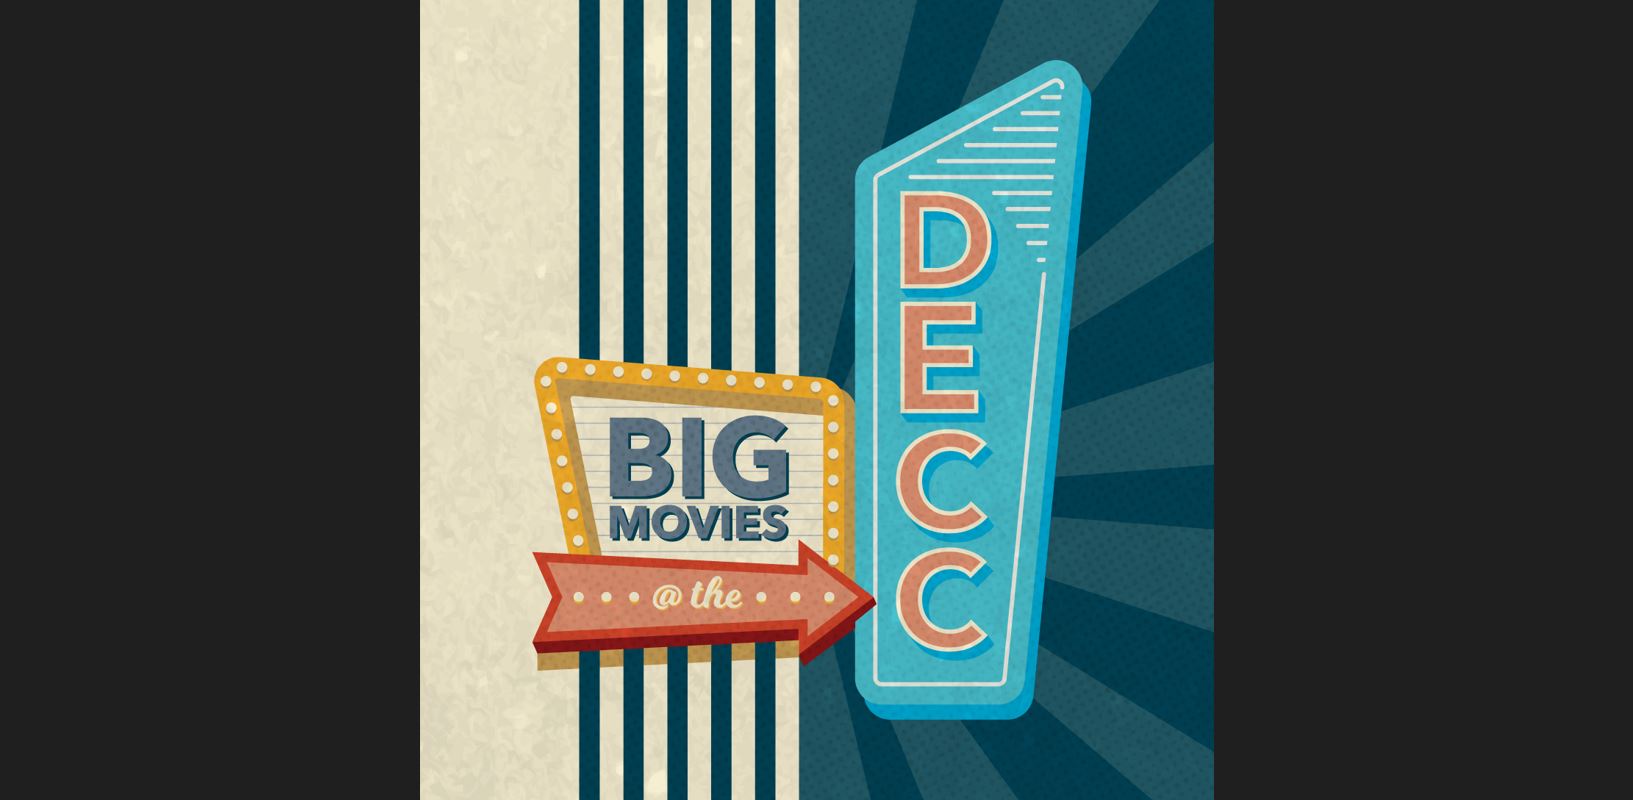 The poster for "Big Movies at the DECC"